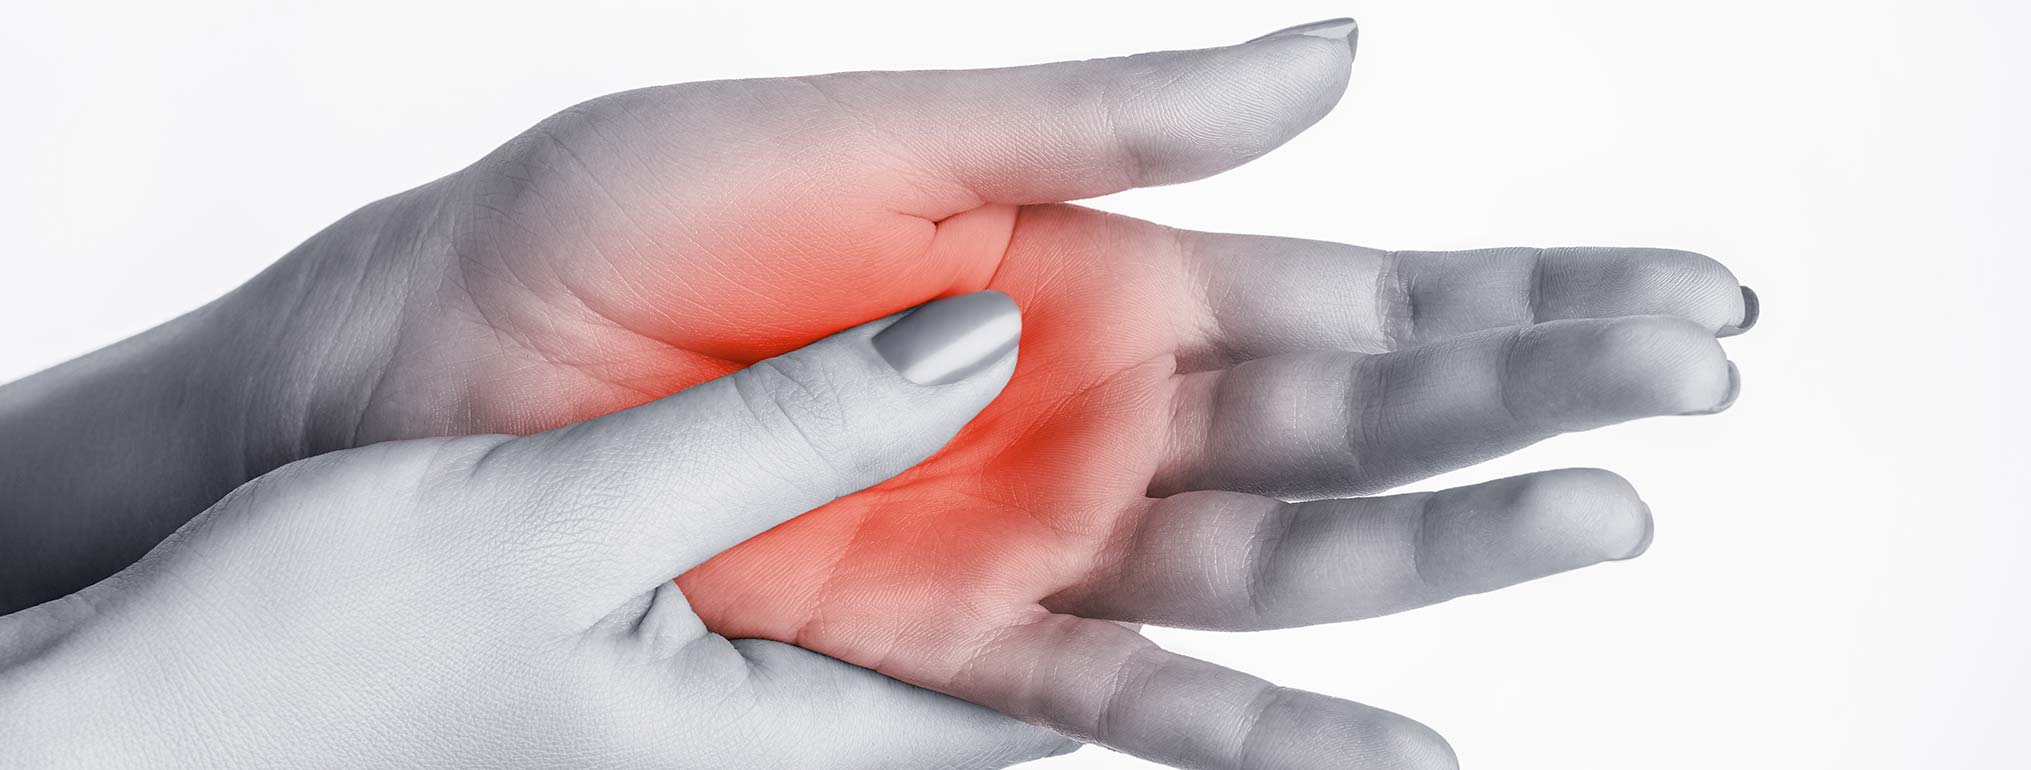 What You Should Know About Paresthesia